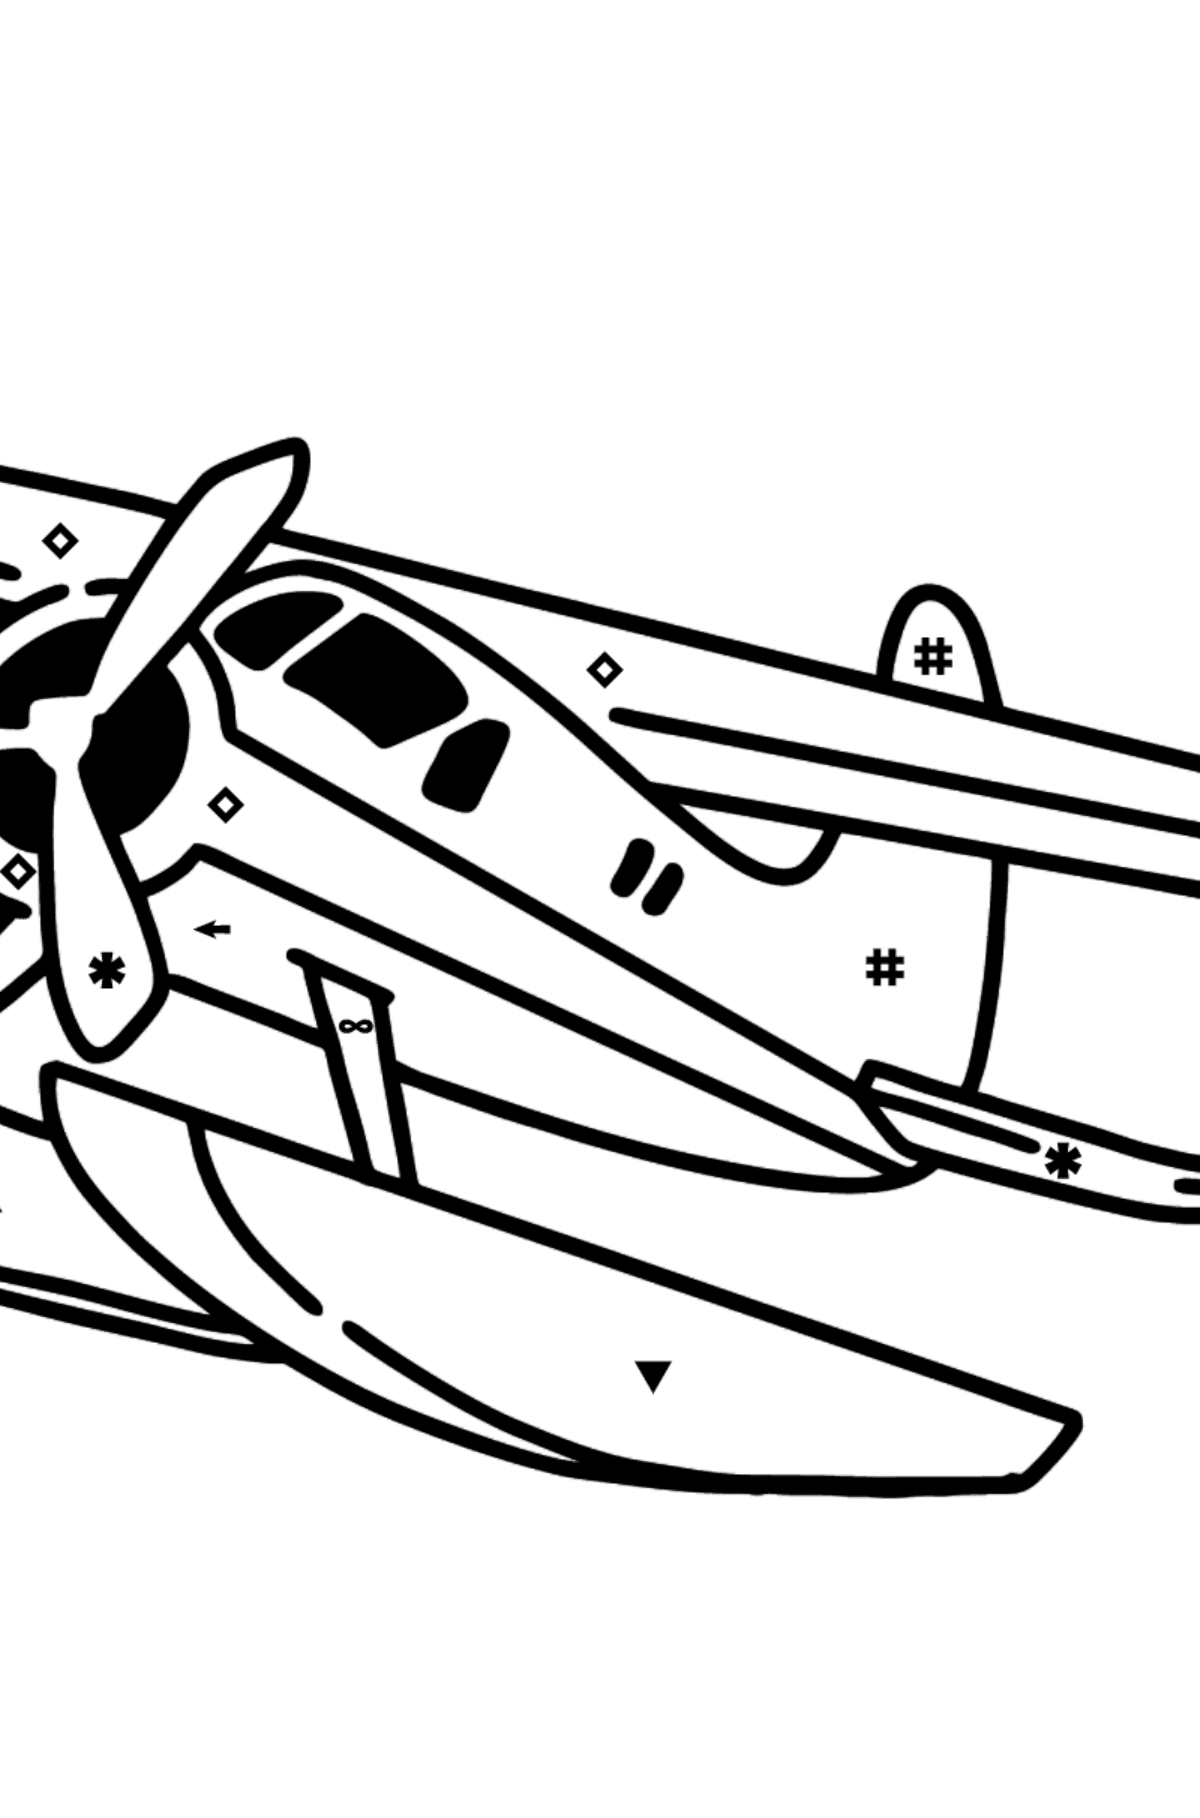 Jet Airplane BE-200 coloring page - Coloring by Symbols for Kids